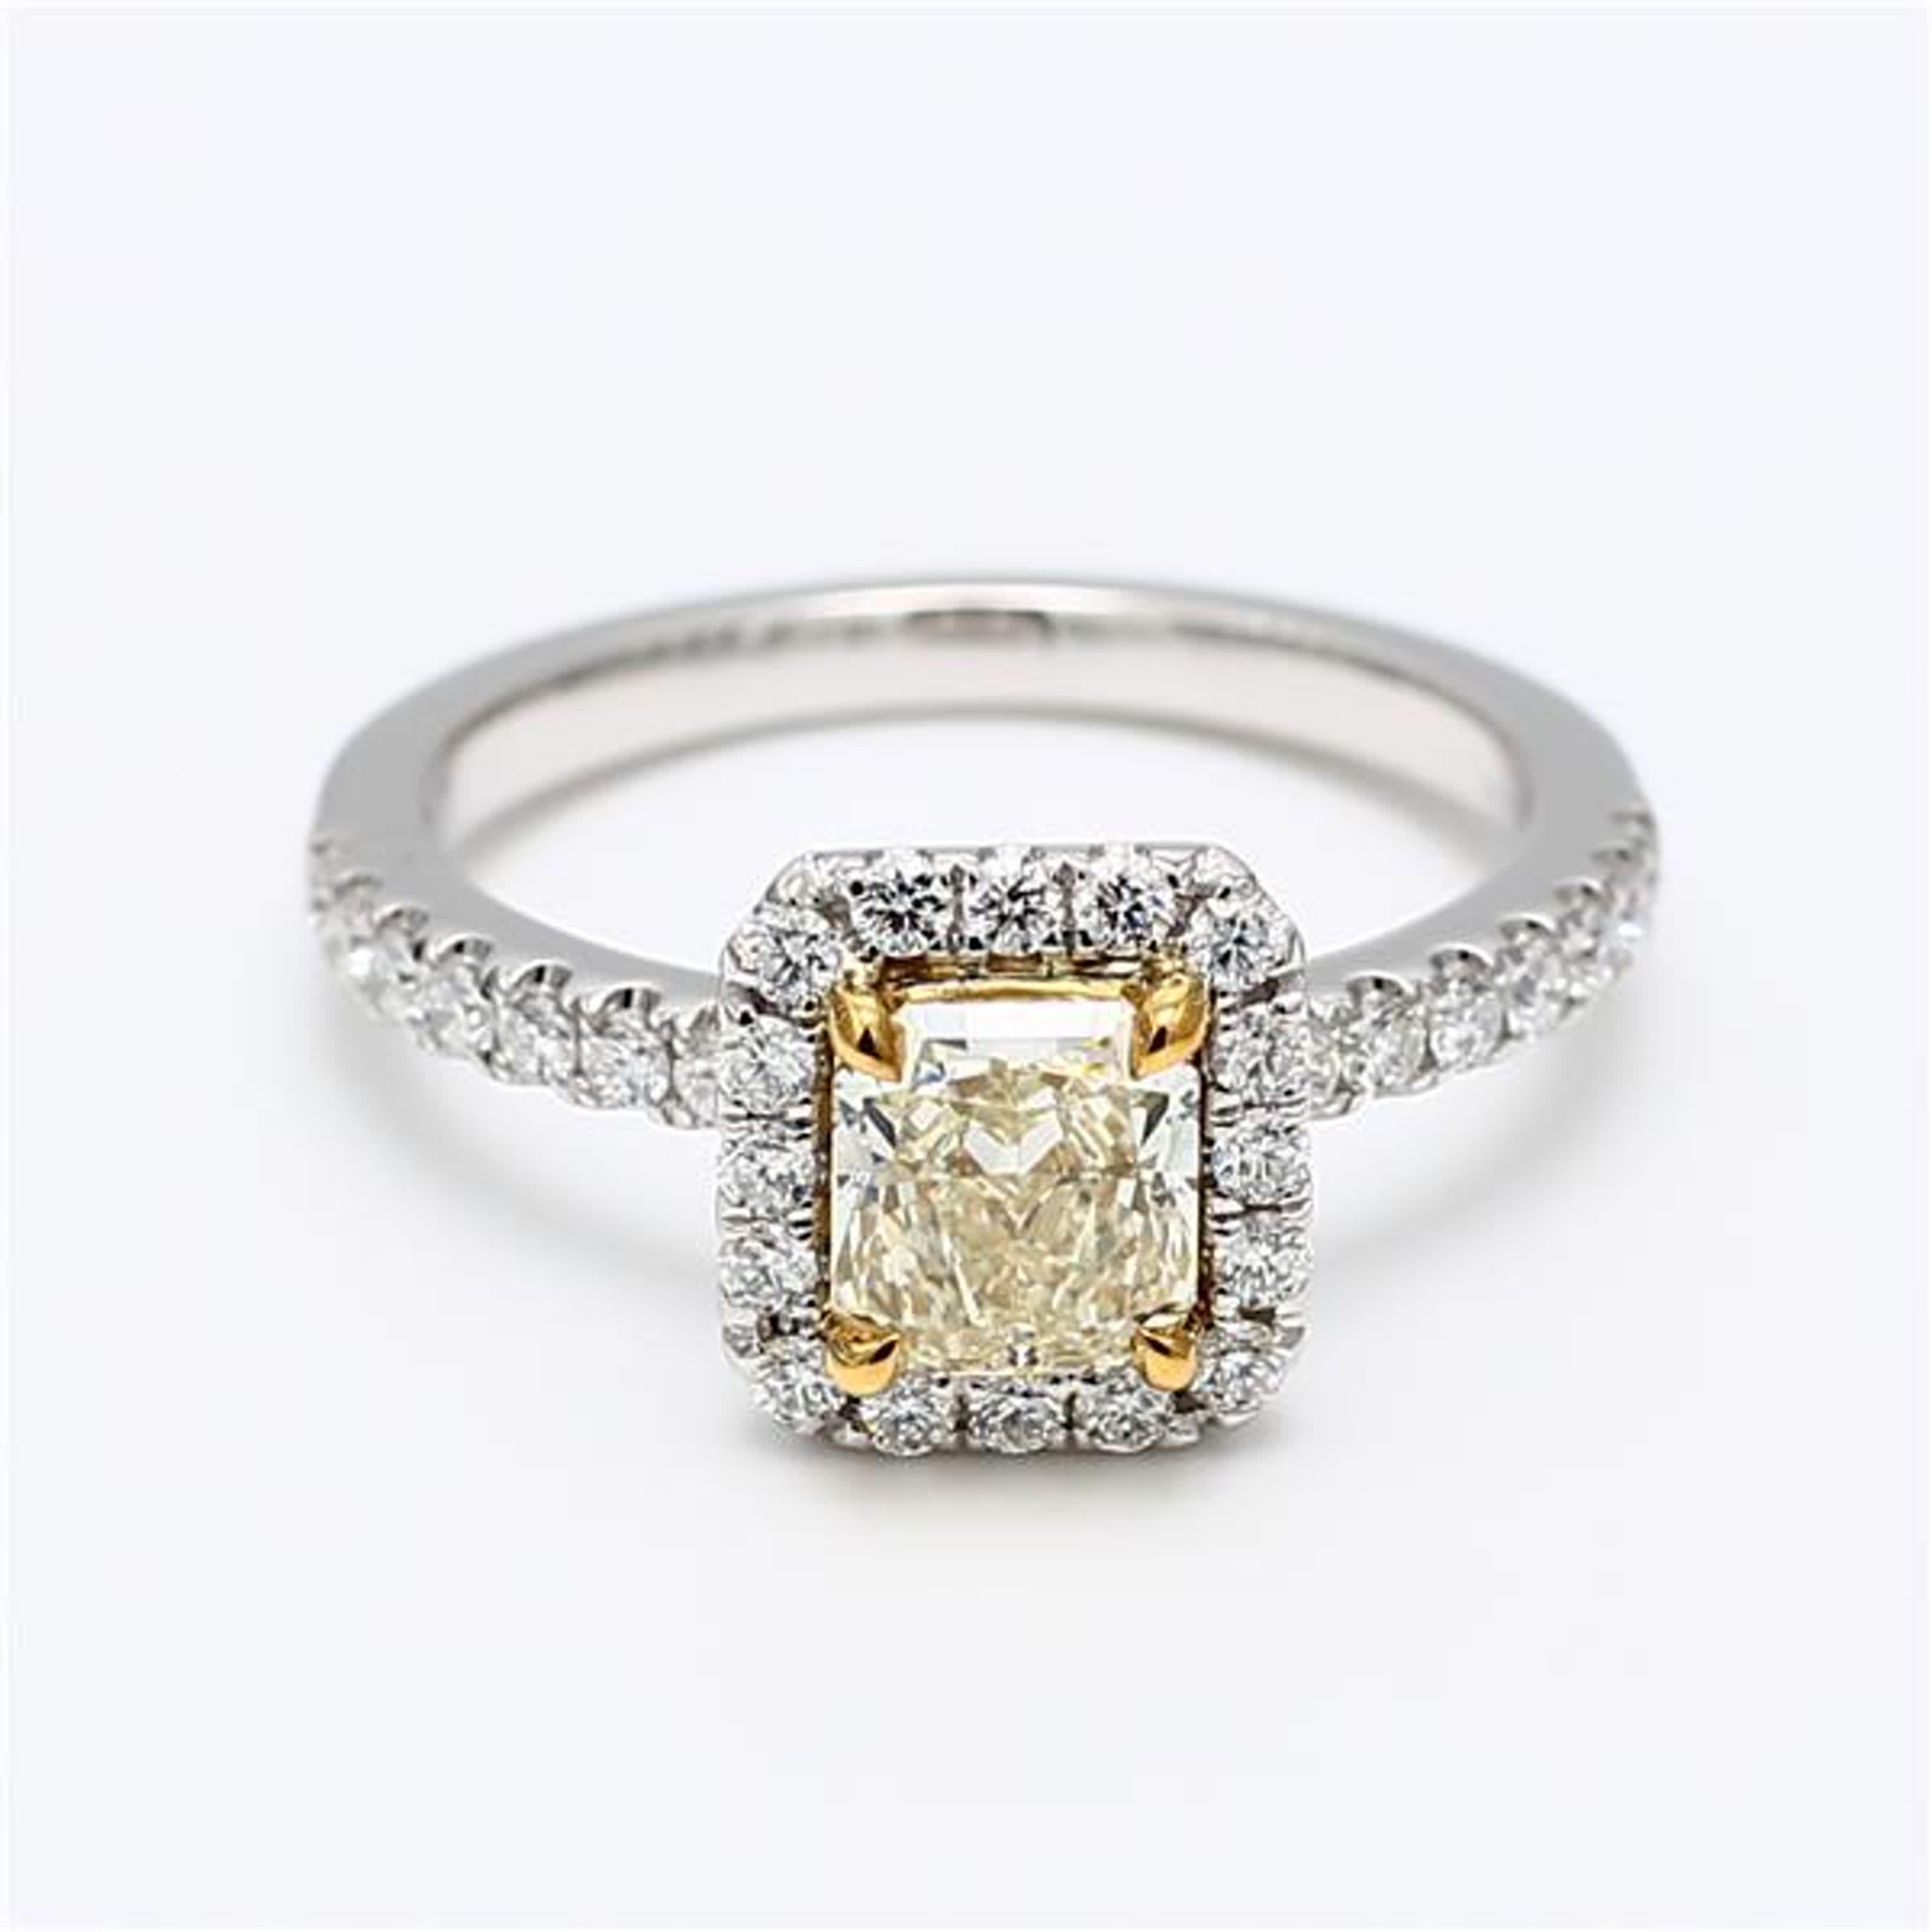 RareGemWorld's classic GIA certified diamond ring. Mounted in a beautiful 18K Gold and Platinum setting with a natural radiant cut yellow diamond. The yellow diamond is surrounded by round natural white diamond melee. This ring is guaranteed to